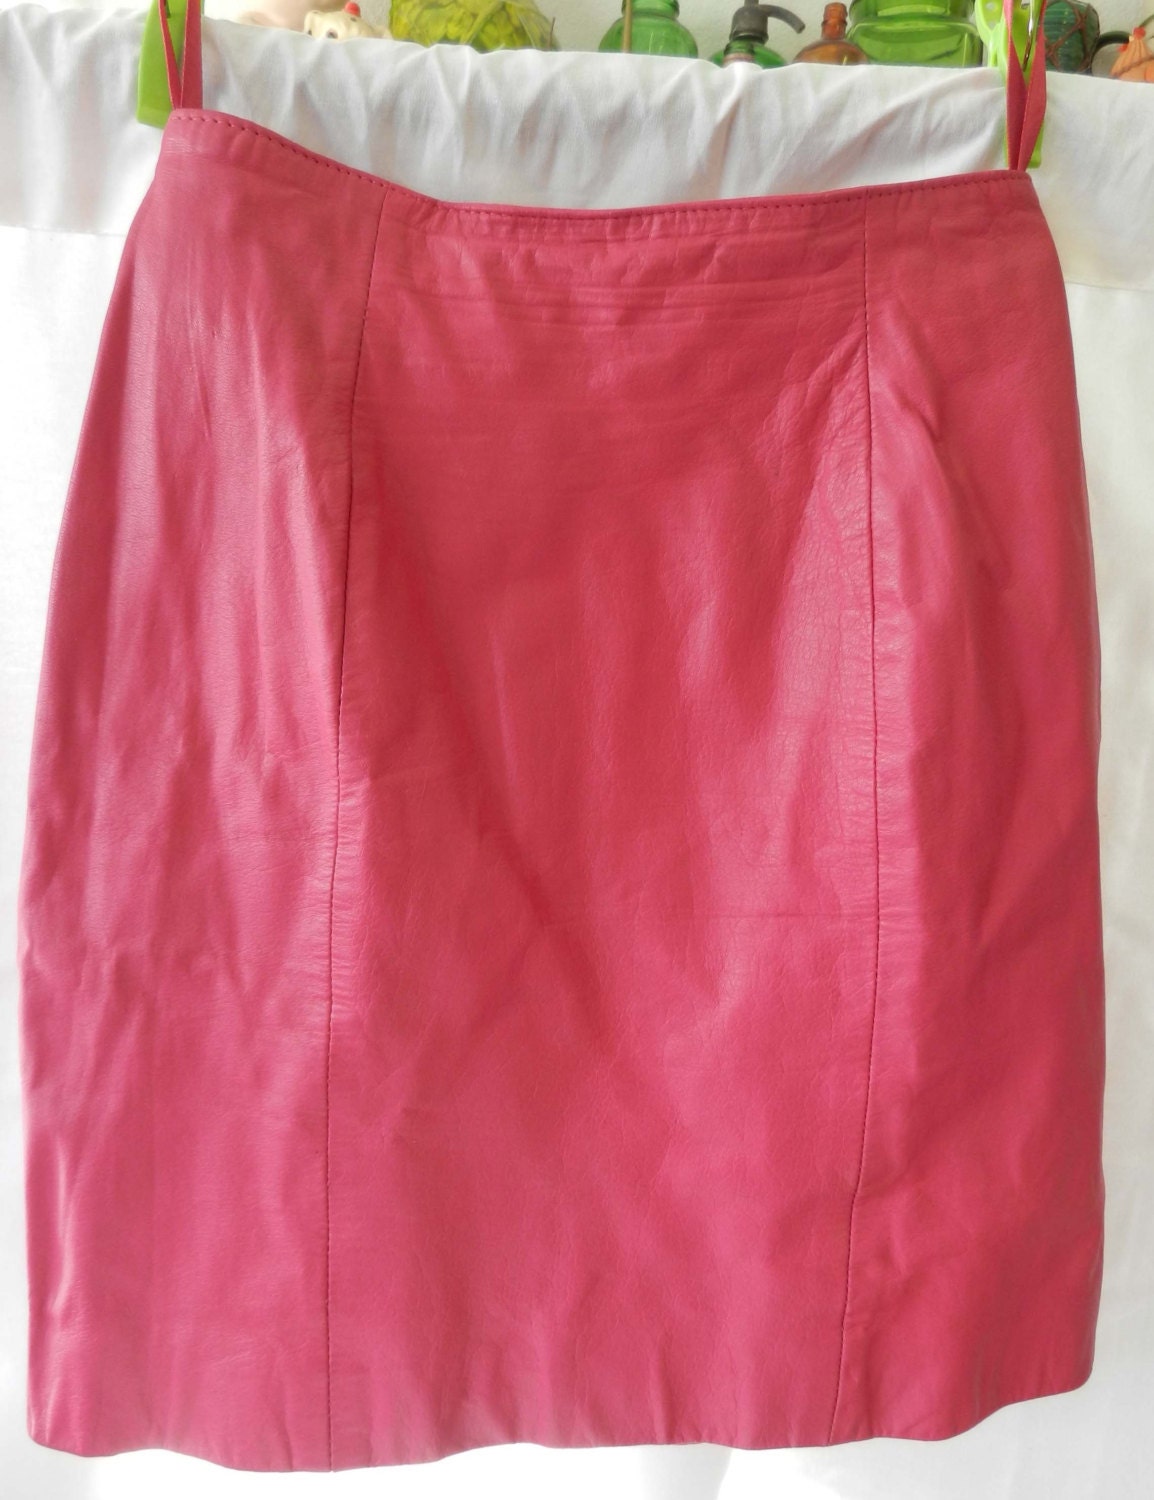 SALE 1980s Hot Pink Leather Mini Skirt by Atticsnoops on Etsy